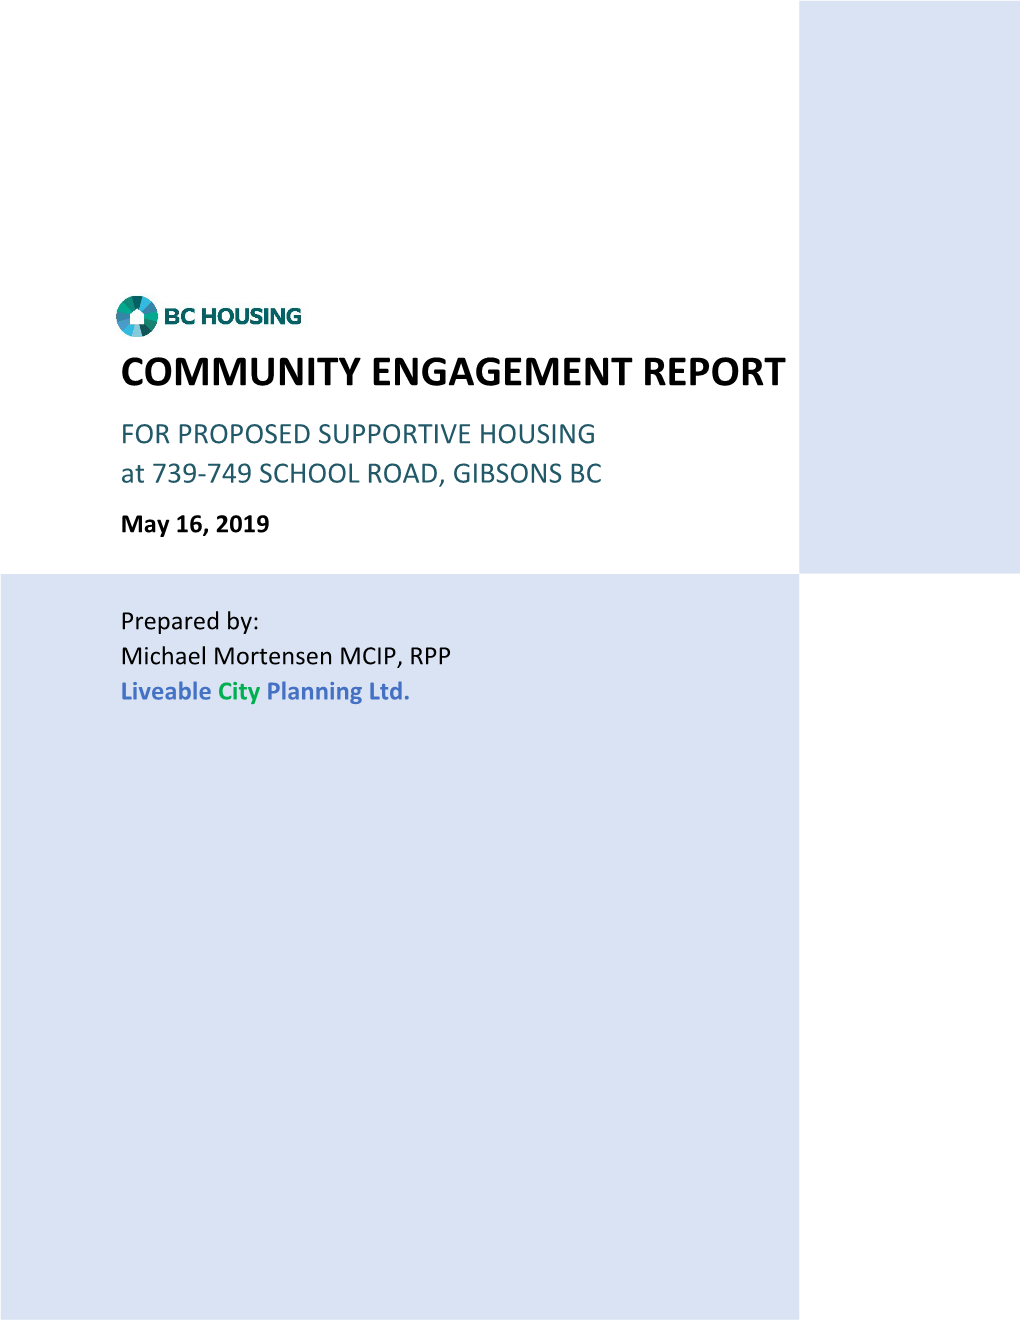 Gibsons Community Engagement Report